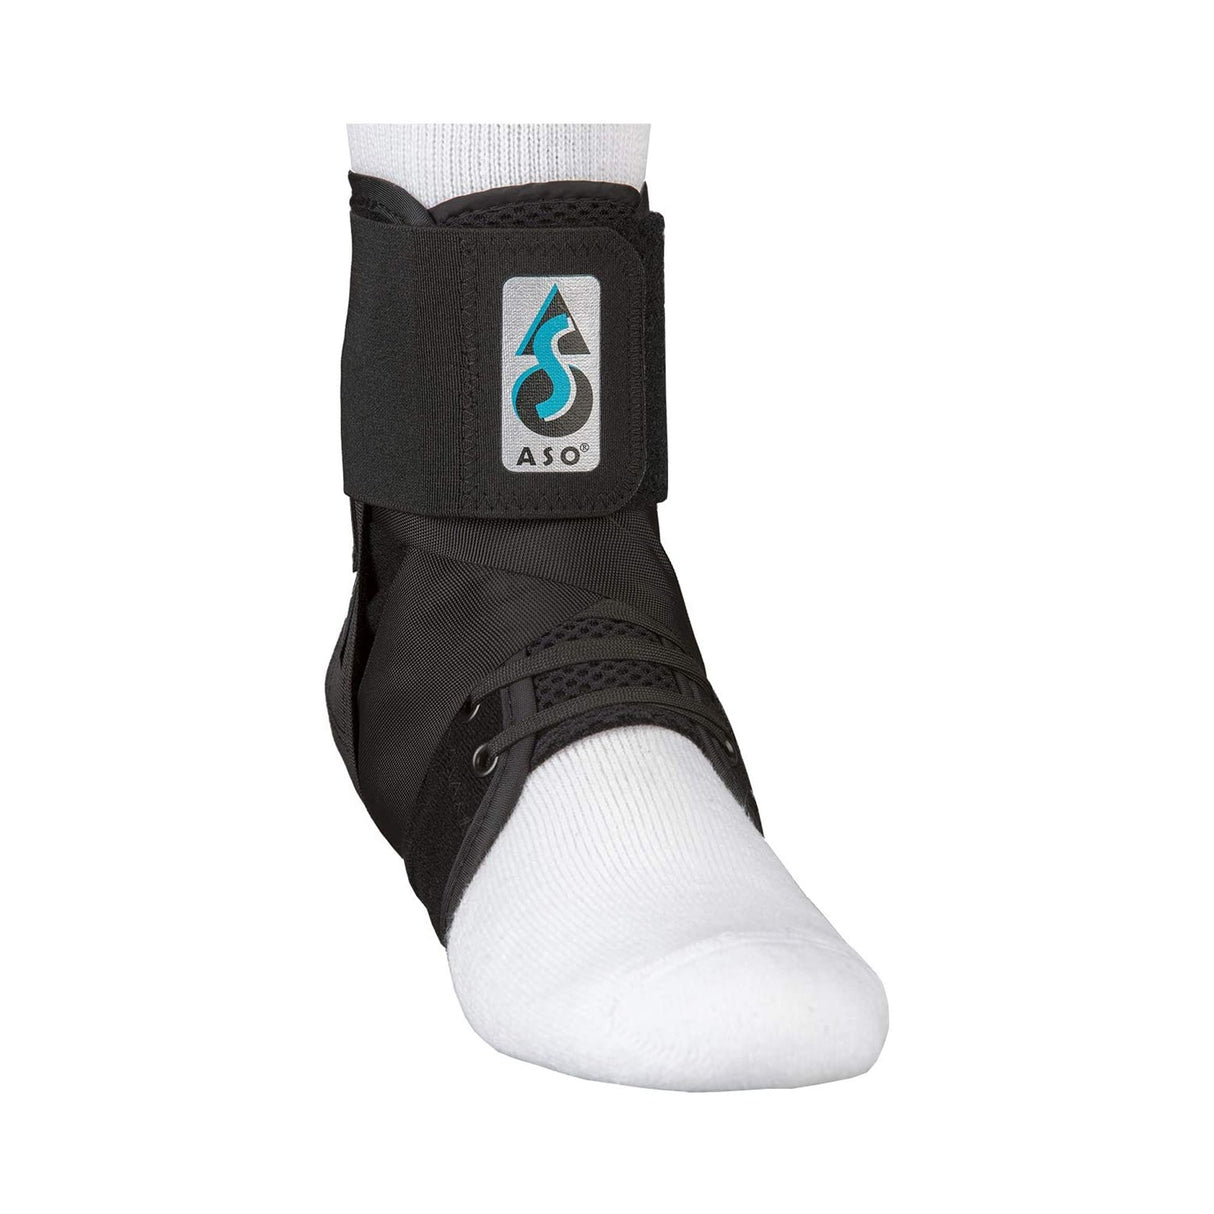 ASO® Low Profile Ankle Support, Medium